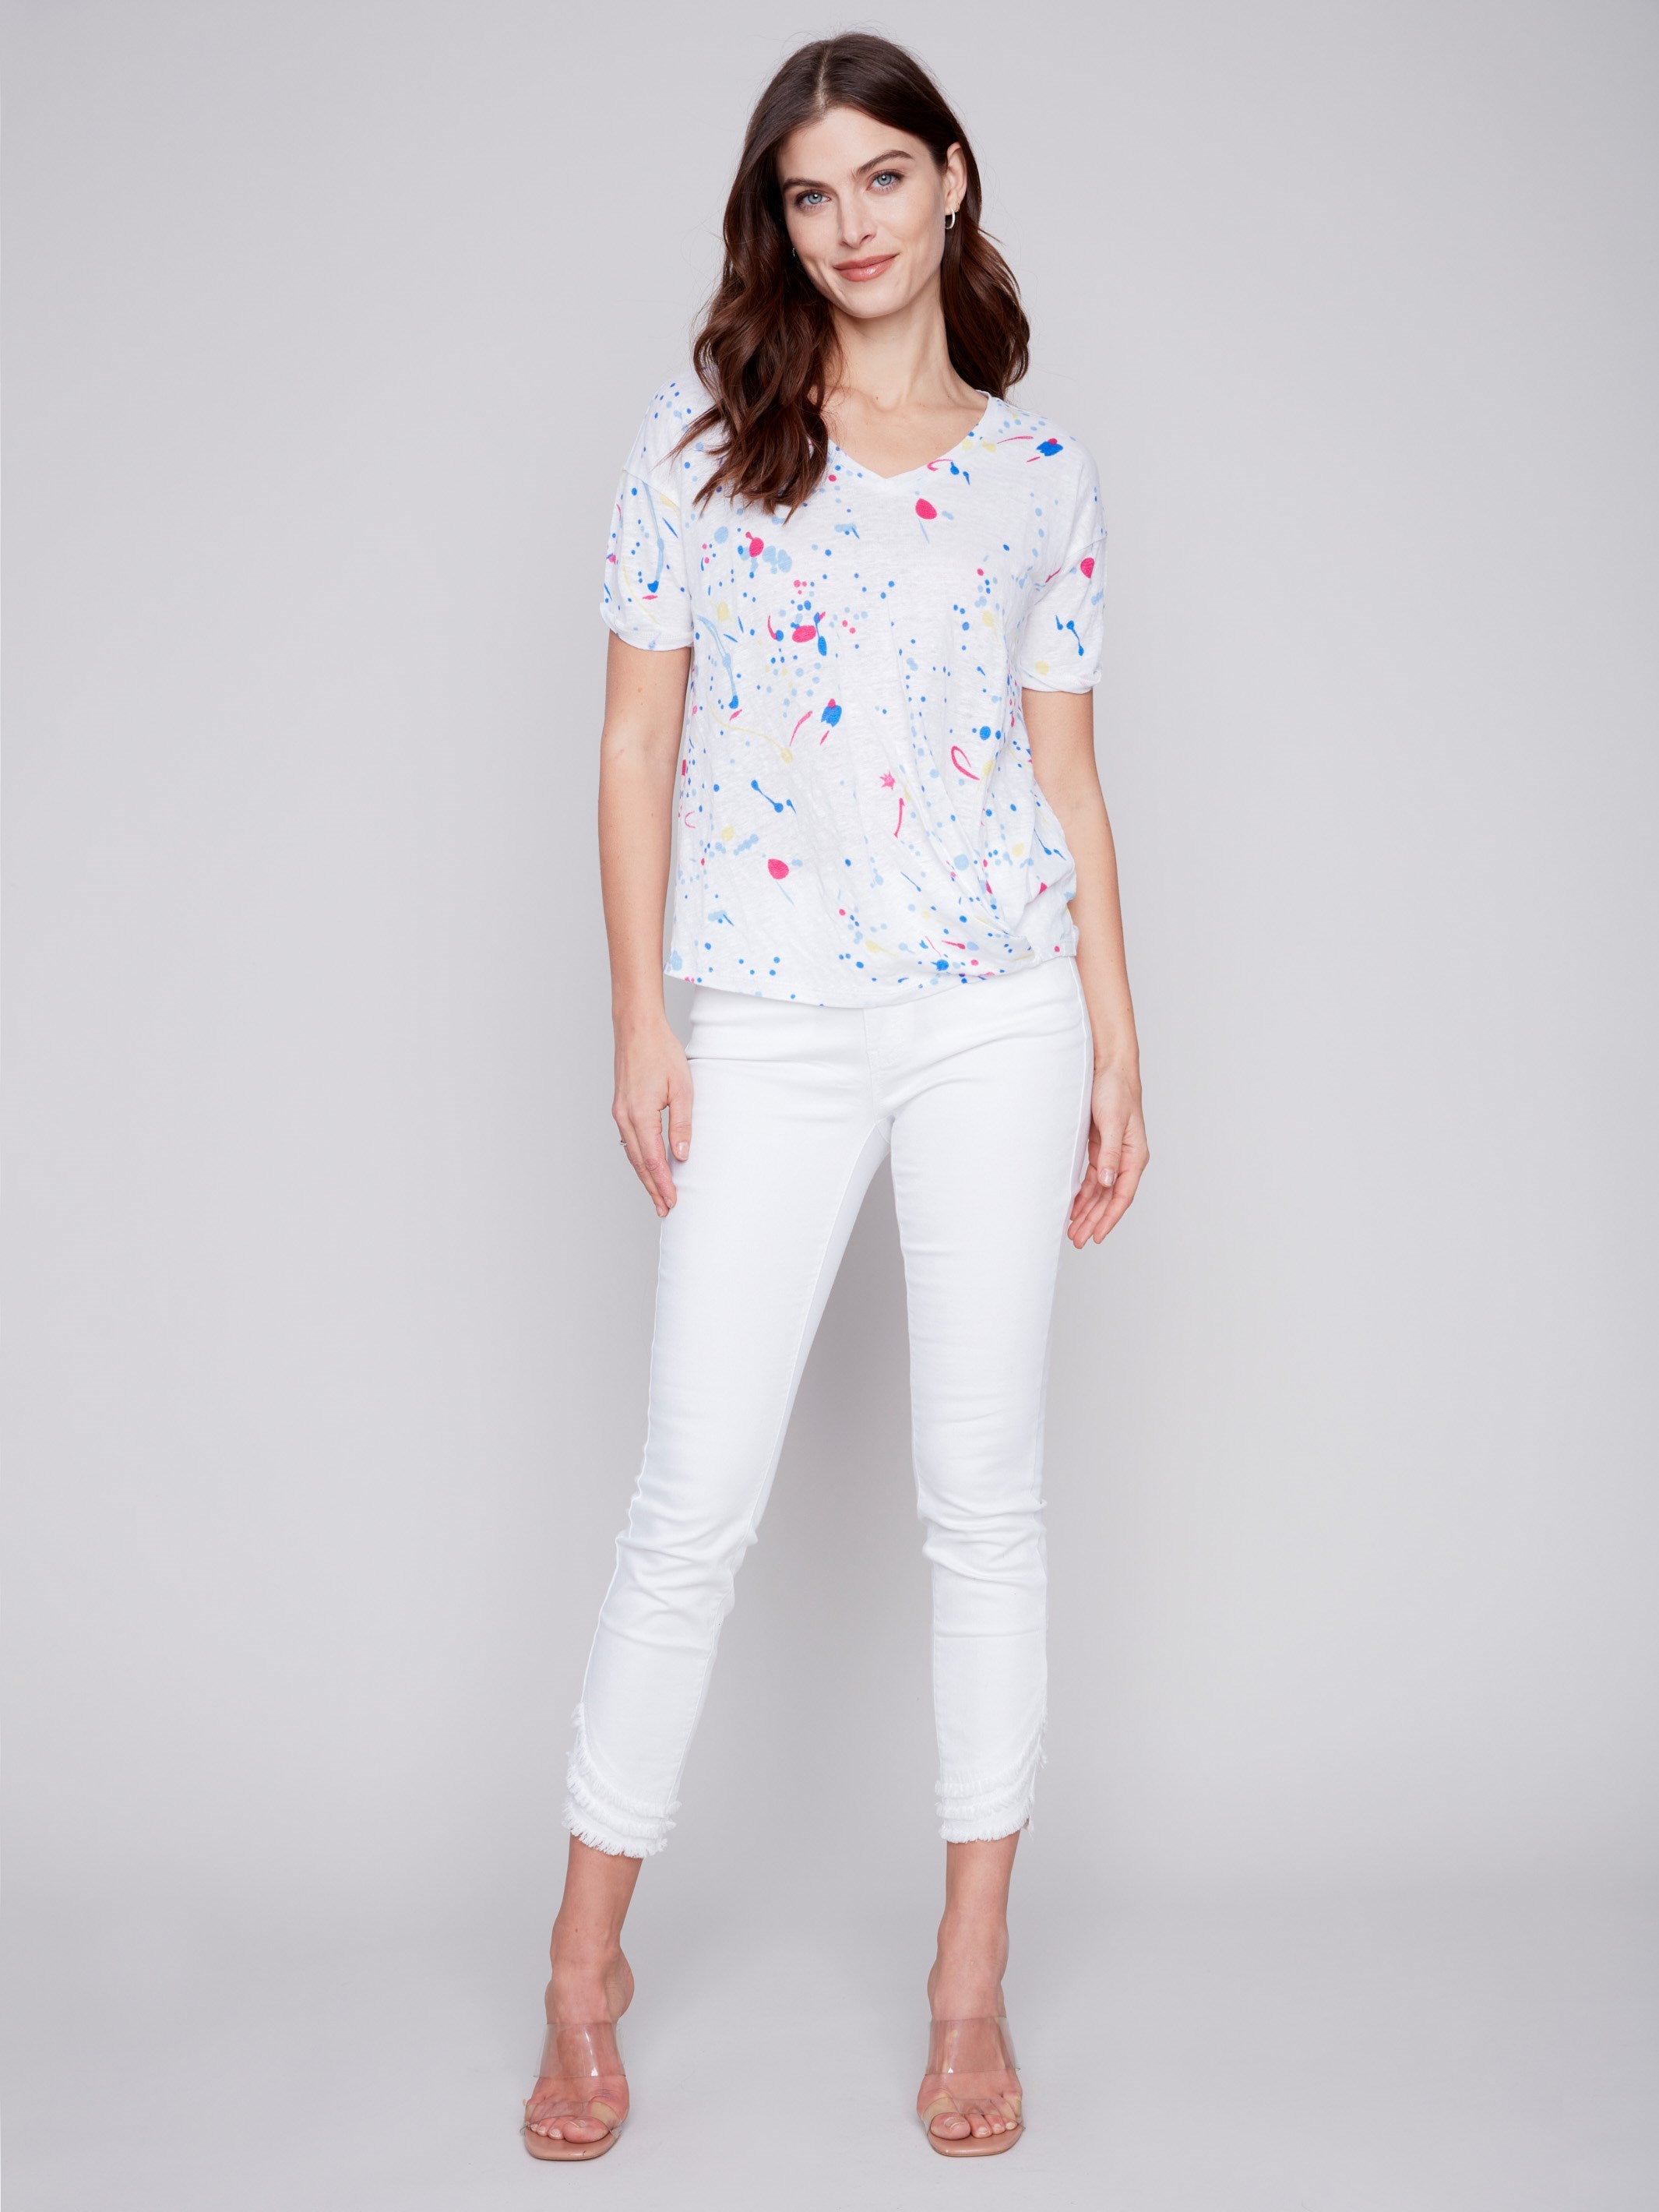 Printed Linen Top With Front Twist Knot - Splash - Charlie B Collection Canada - Image 6